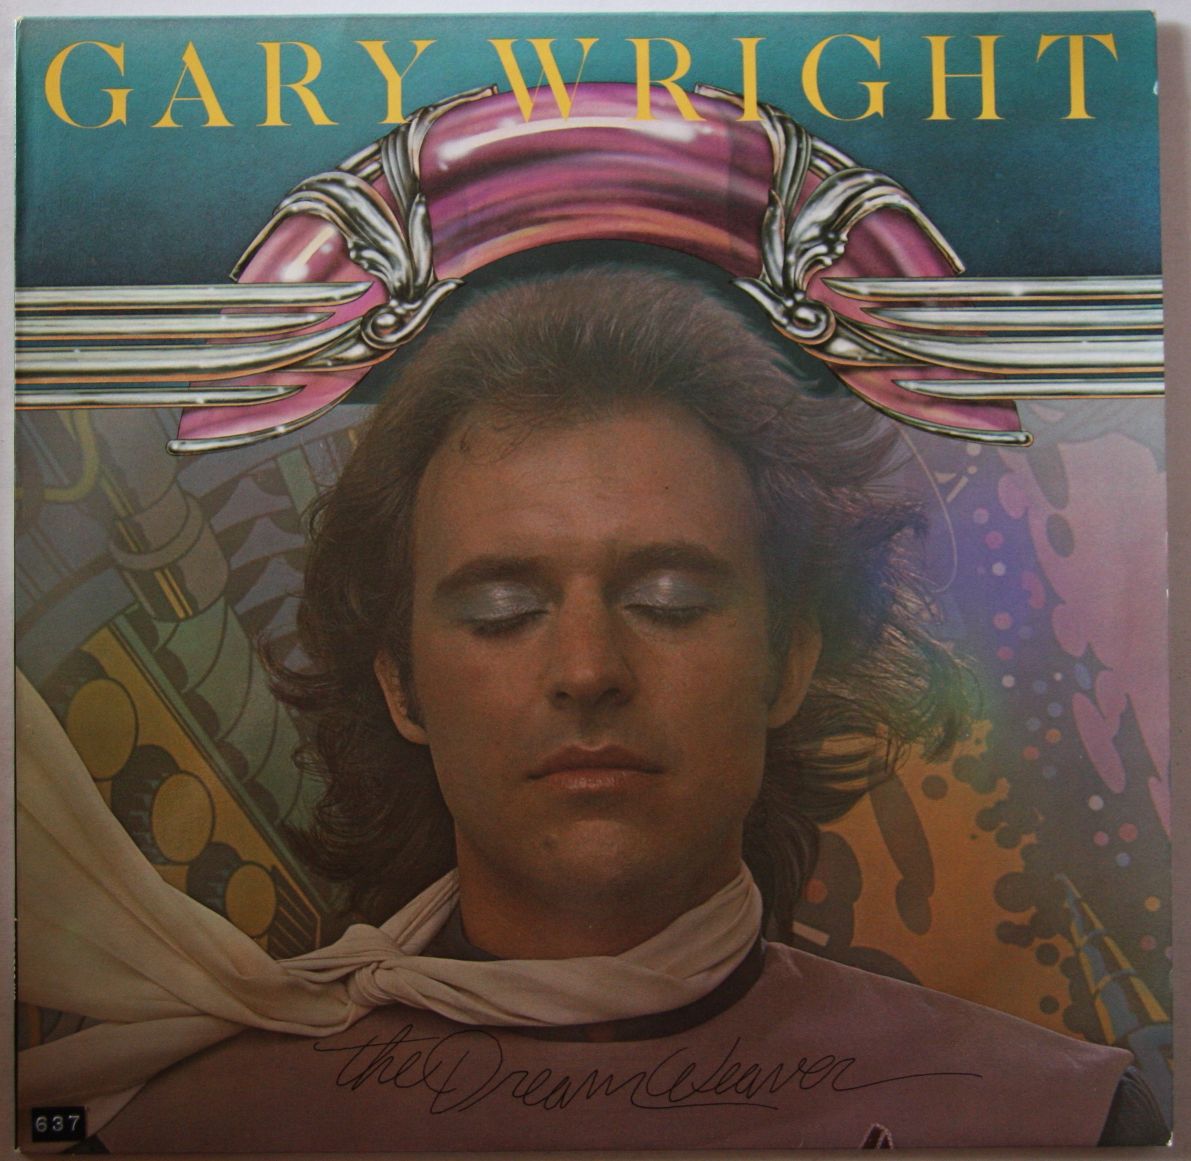 Named gary wright. Performances, cds, sound department the. Alternative country-influenced music videos ceo of. Wright farmers insurance profile on stage, ... - 611575